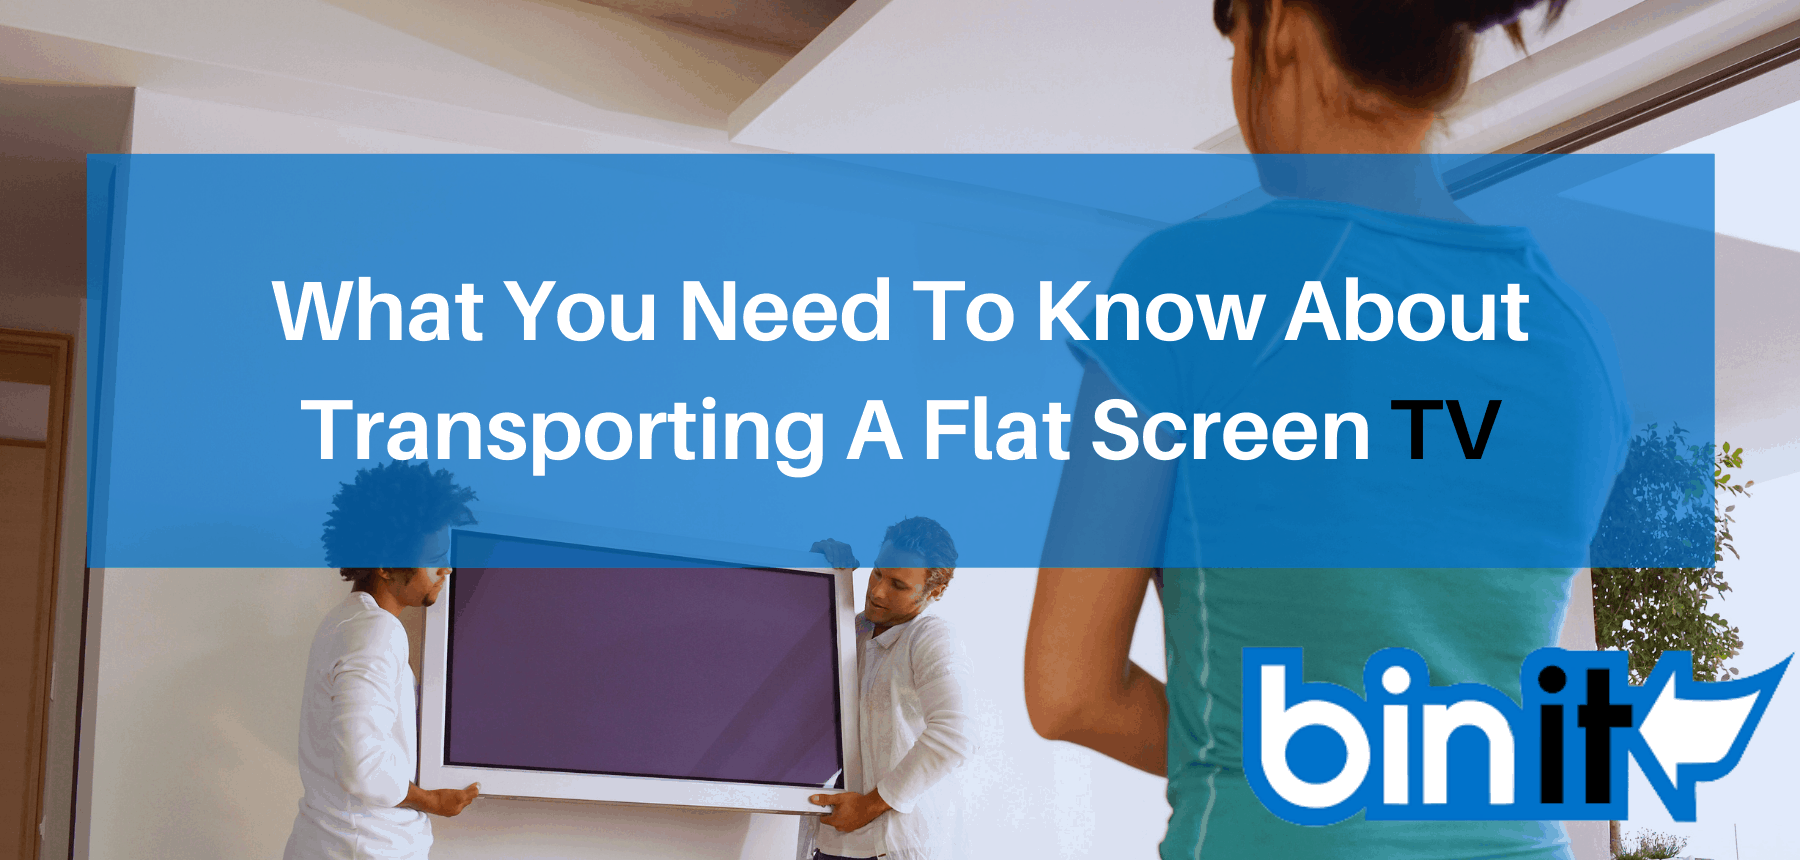 What You Need Know About Transporting A Flat Screen TV